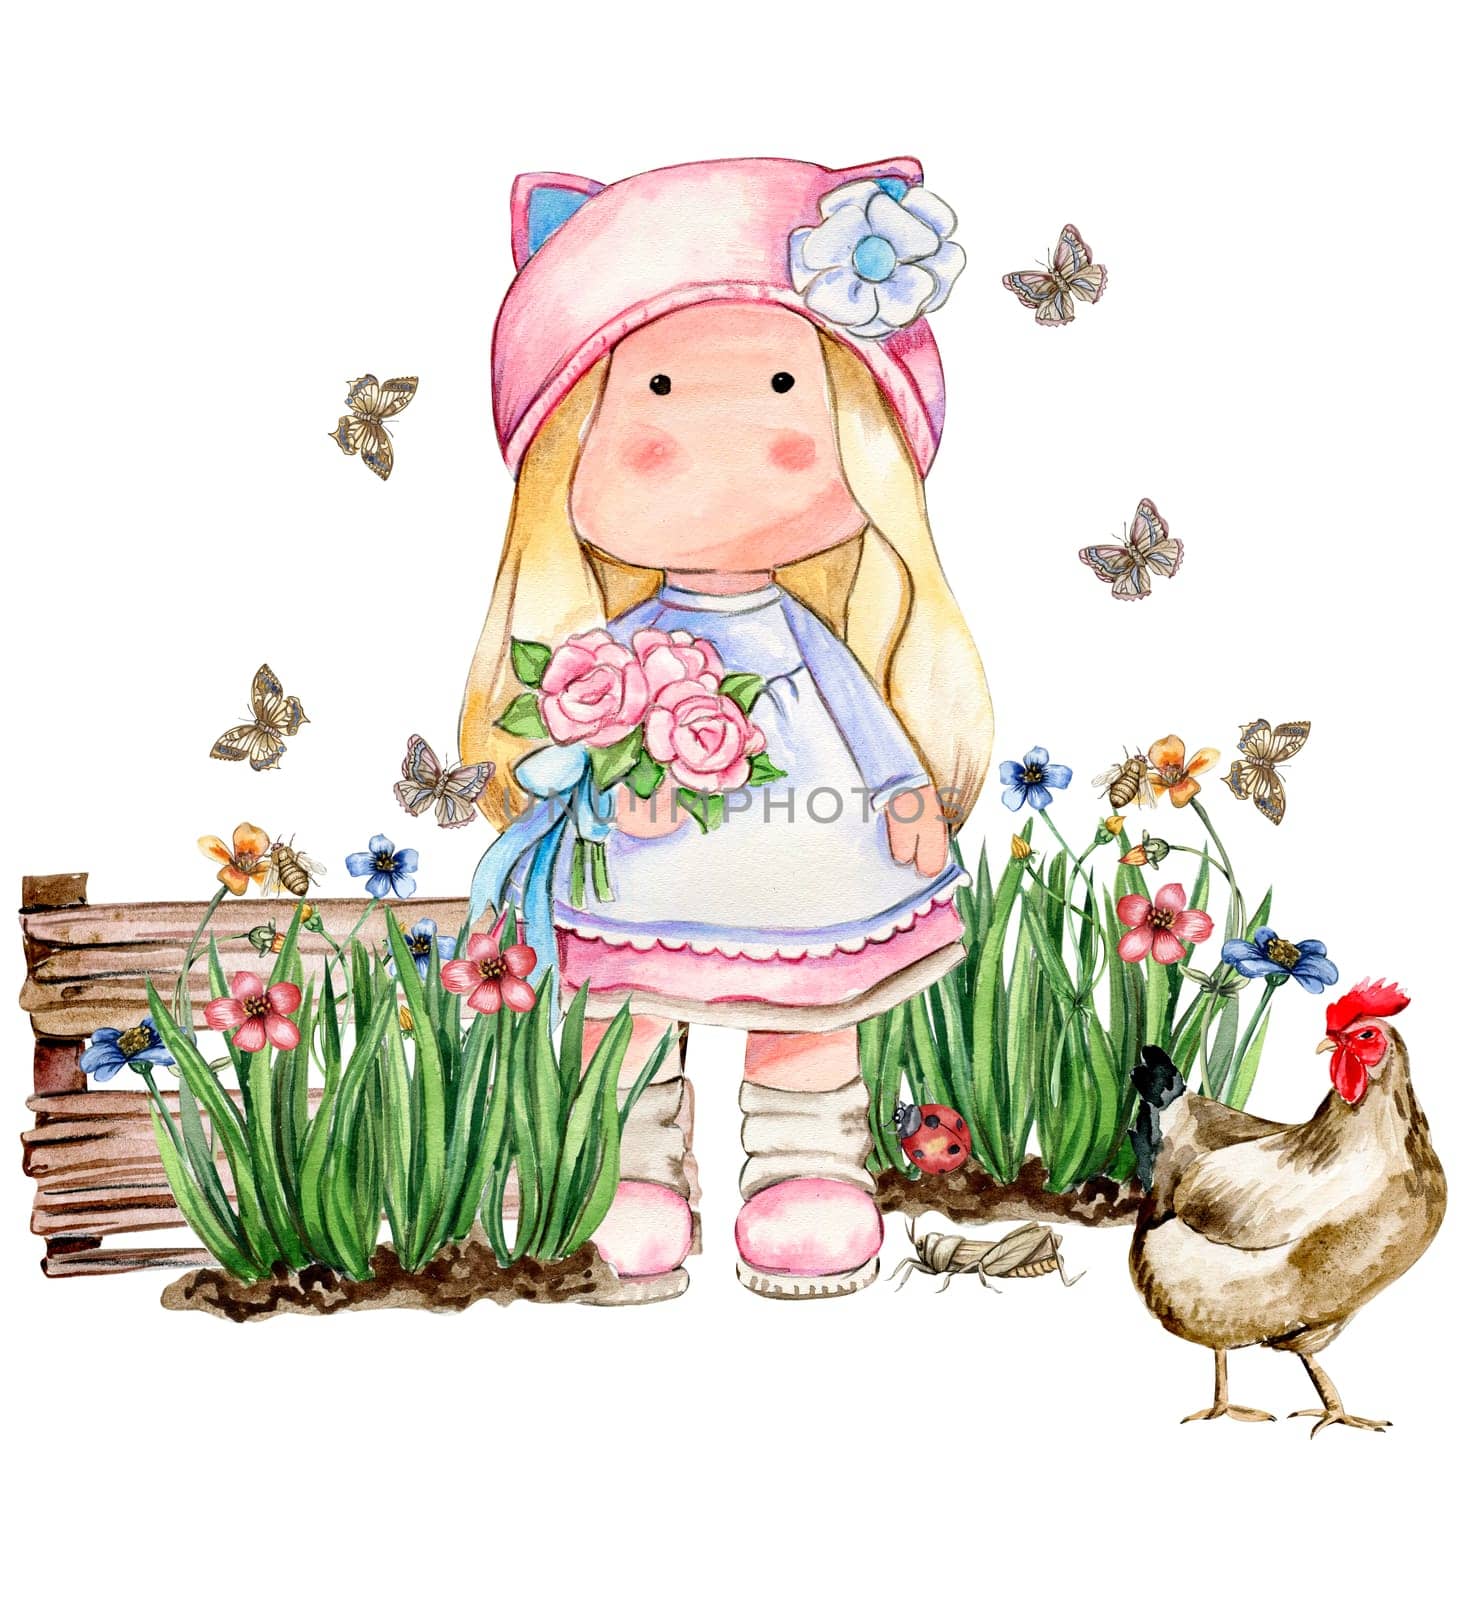 Spring flowers composition with a cute Tilda doll, watercolor illustration for cards, backgrounds,scrapbooking.Cartoon hand drawn background with flower for kids design.Perfect for wedding invitation.